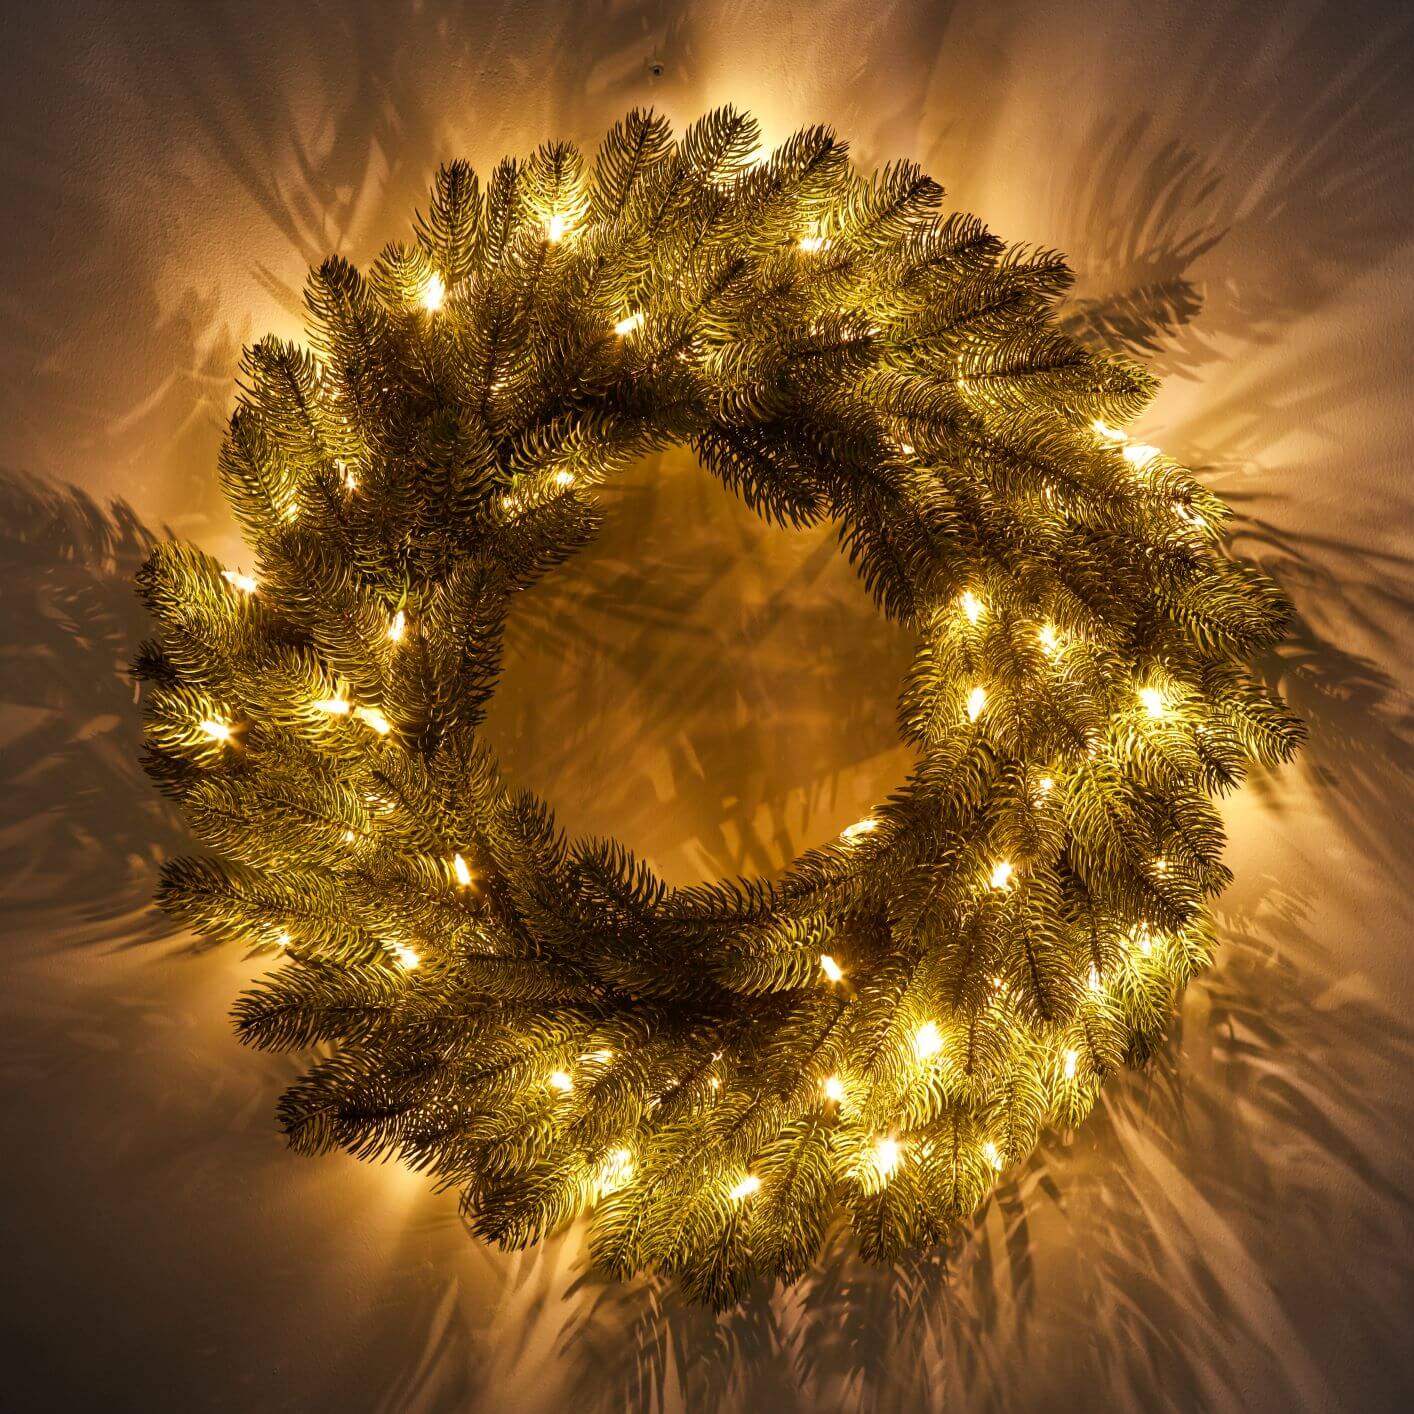 King of Christmas 24" Royal Fir Wreath with Warm White LED Lights (Battery Operated)